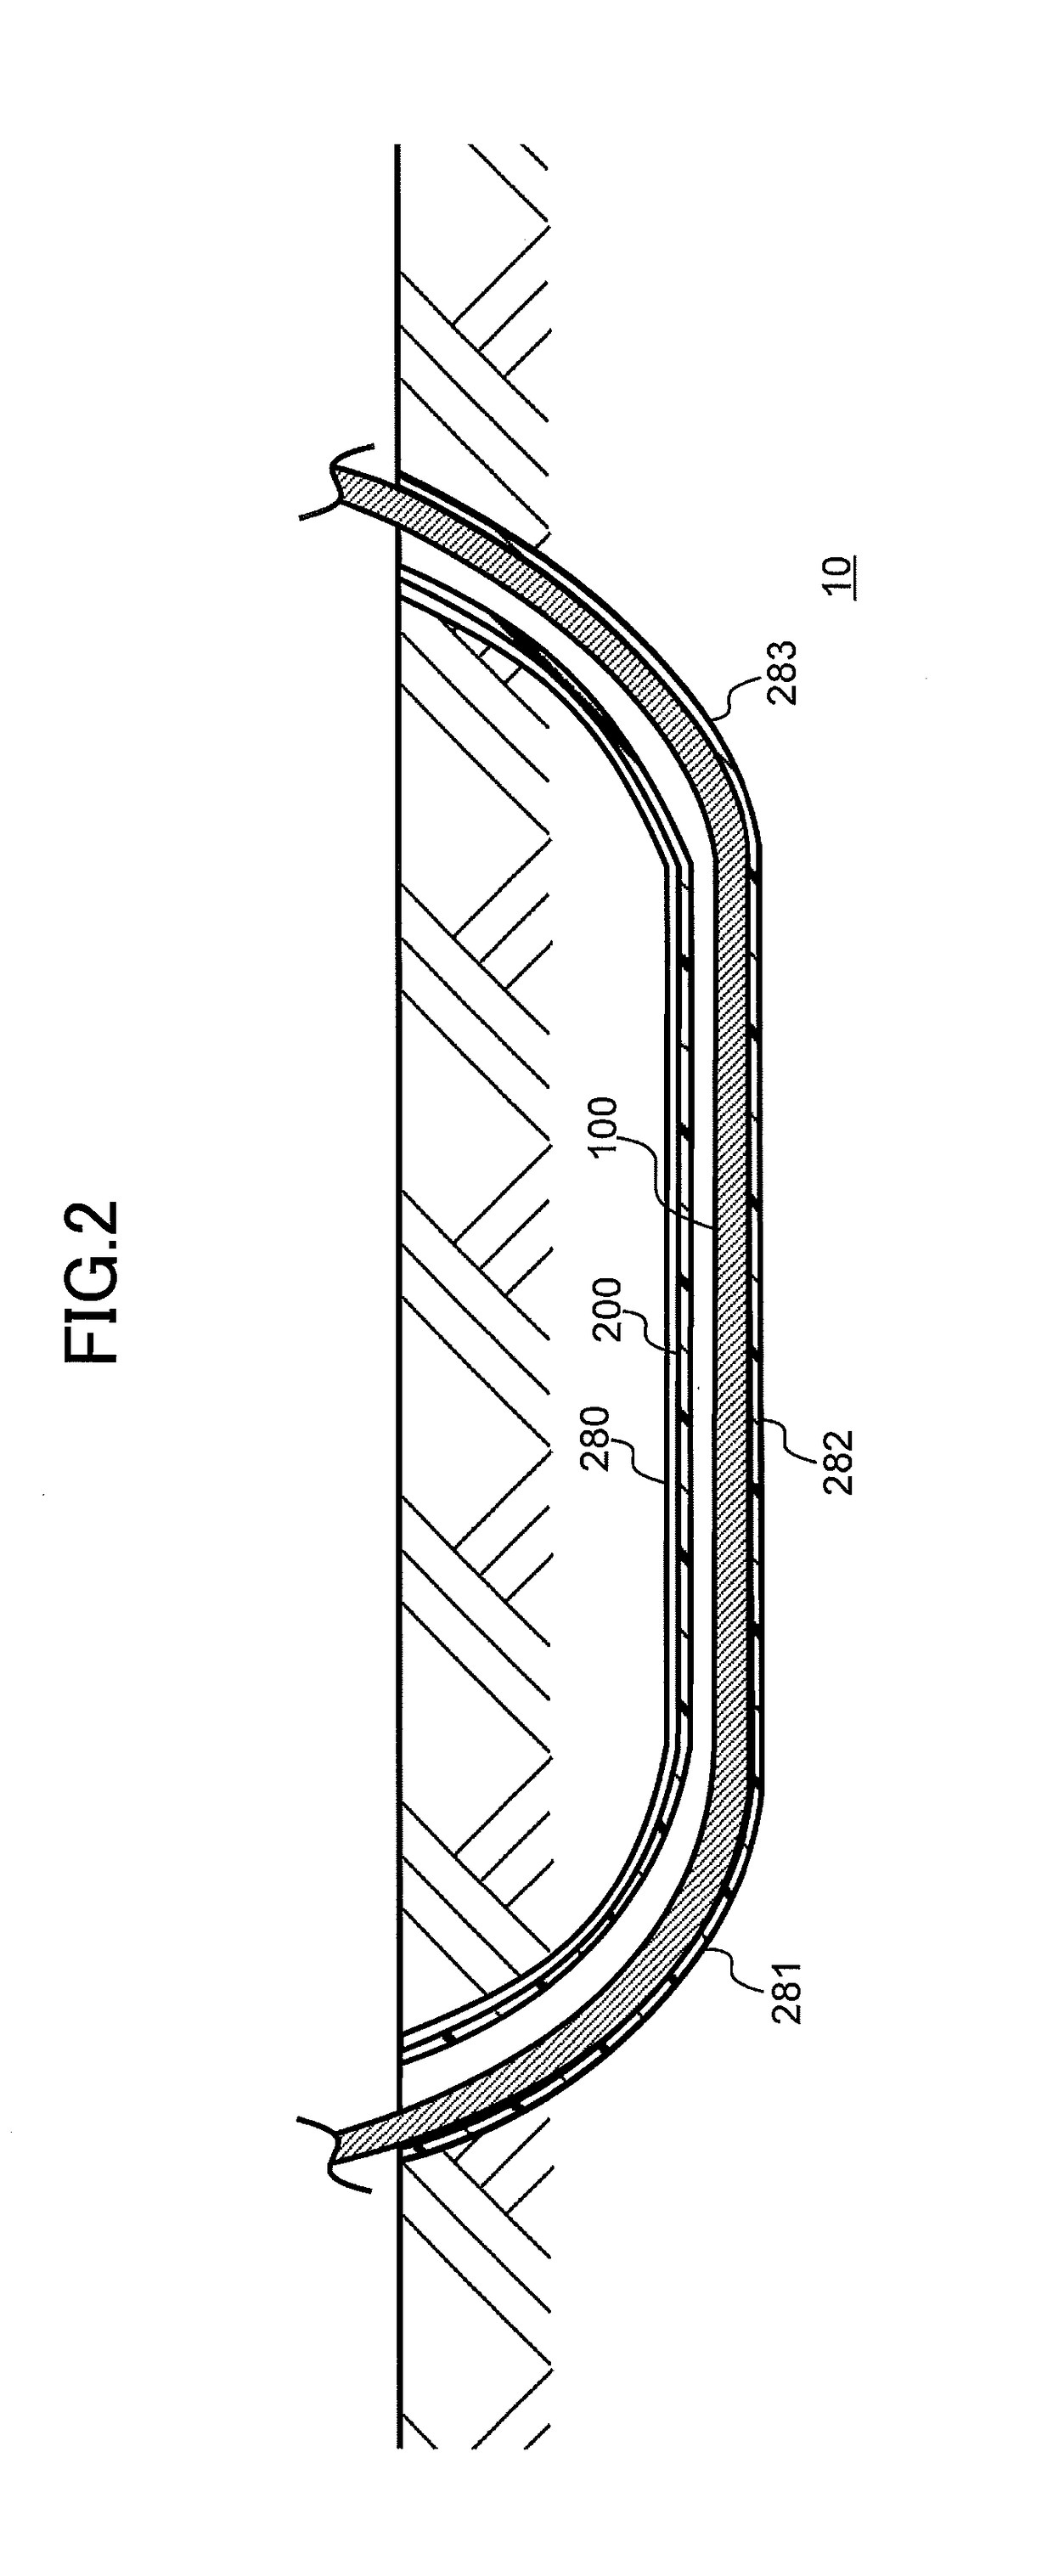 Power cable, power cable system, method of grounding power cable system and method of constructing power cable system